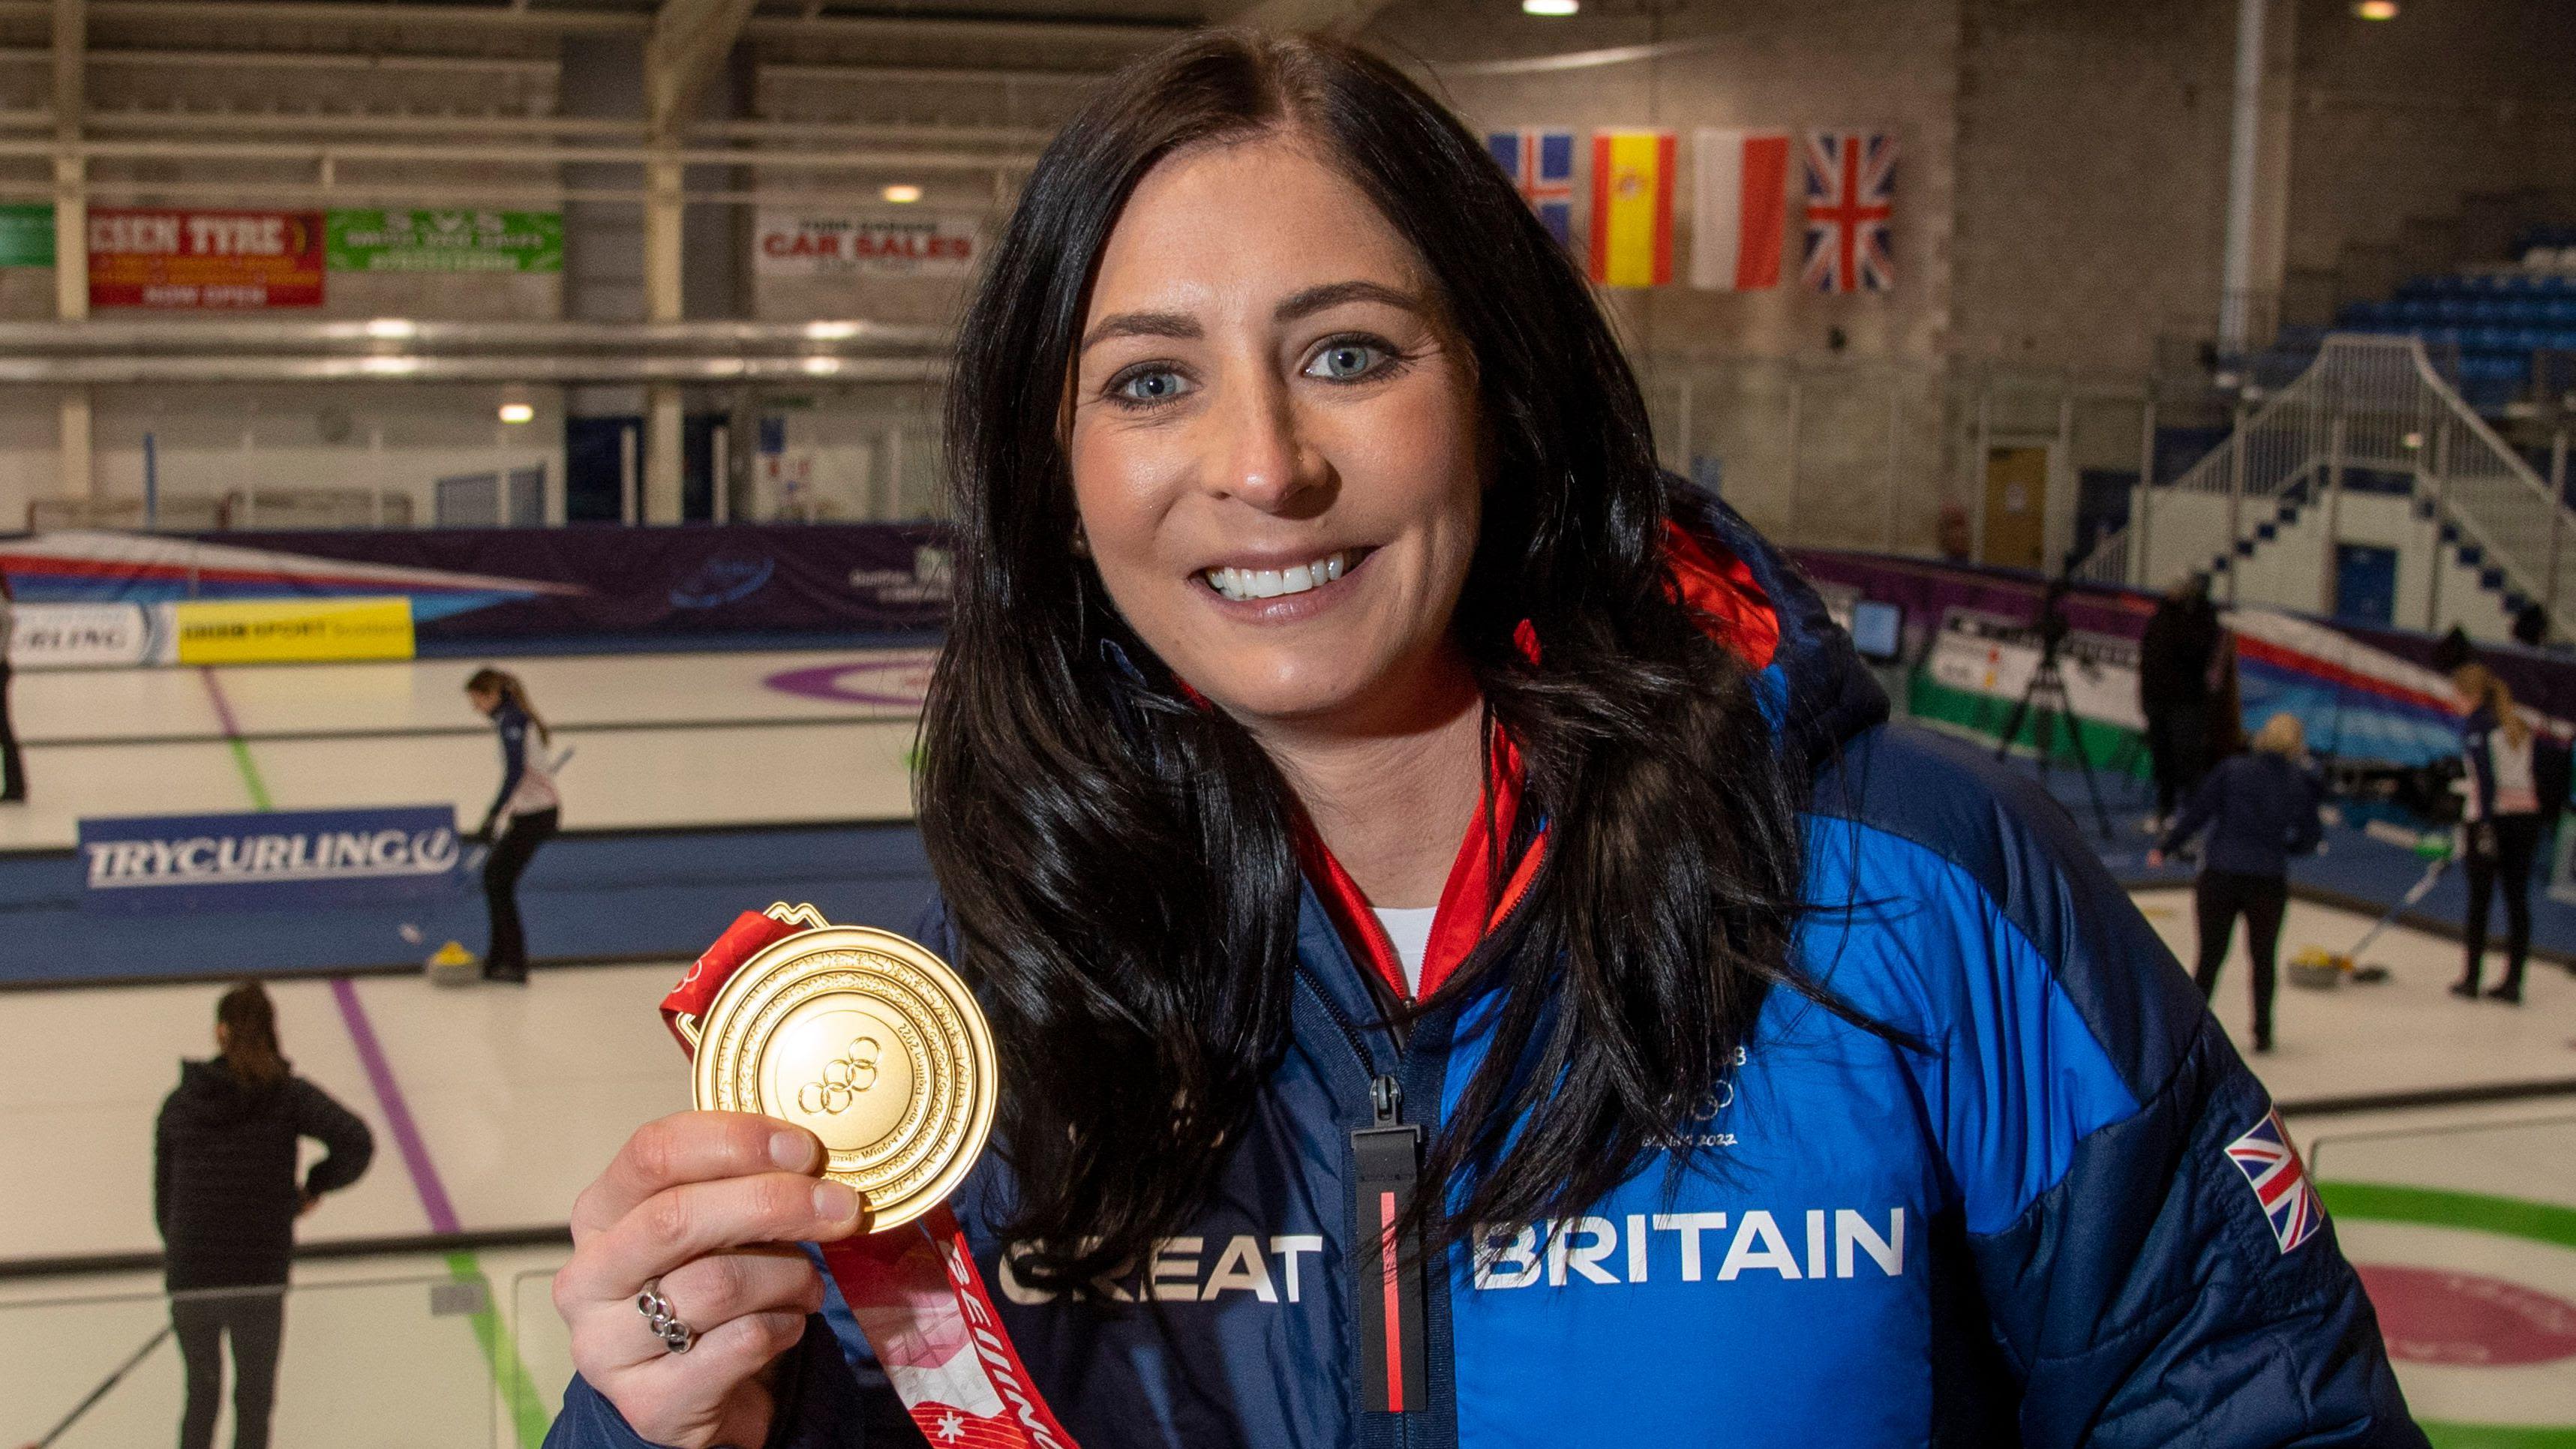 Muirhead named Team GB chef de mission for 2026 Winter Games